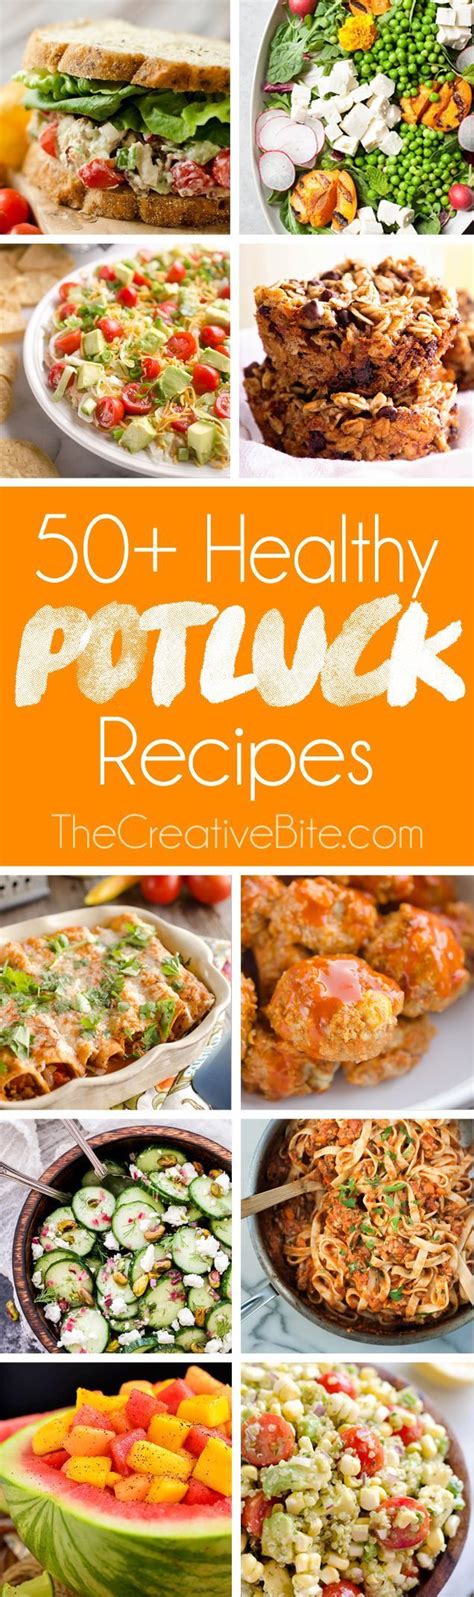 Healthy Potluck Appetizers 14 Healthy Potluck Ideas For Game Day In